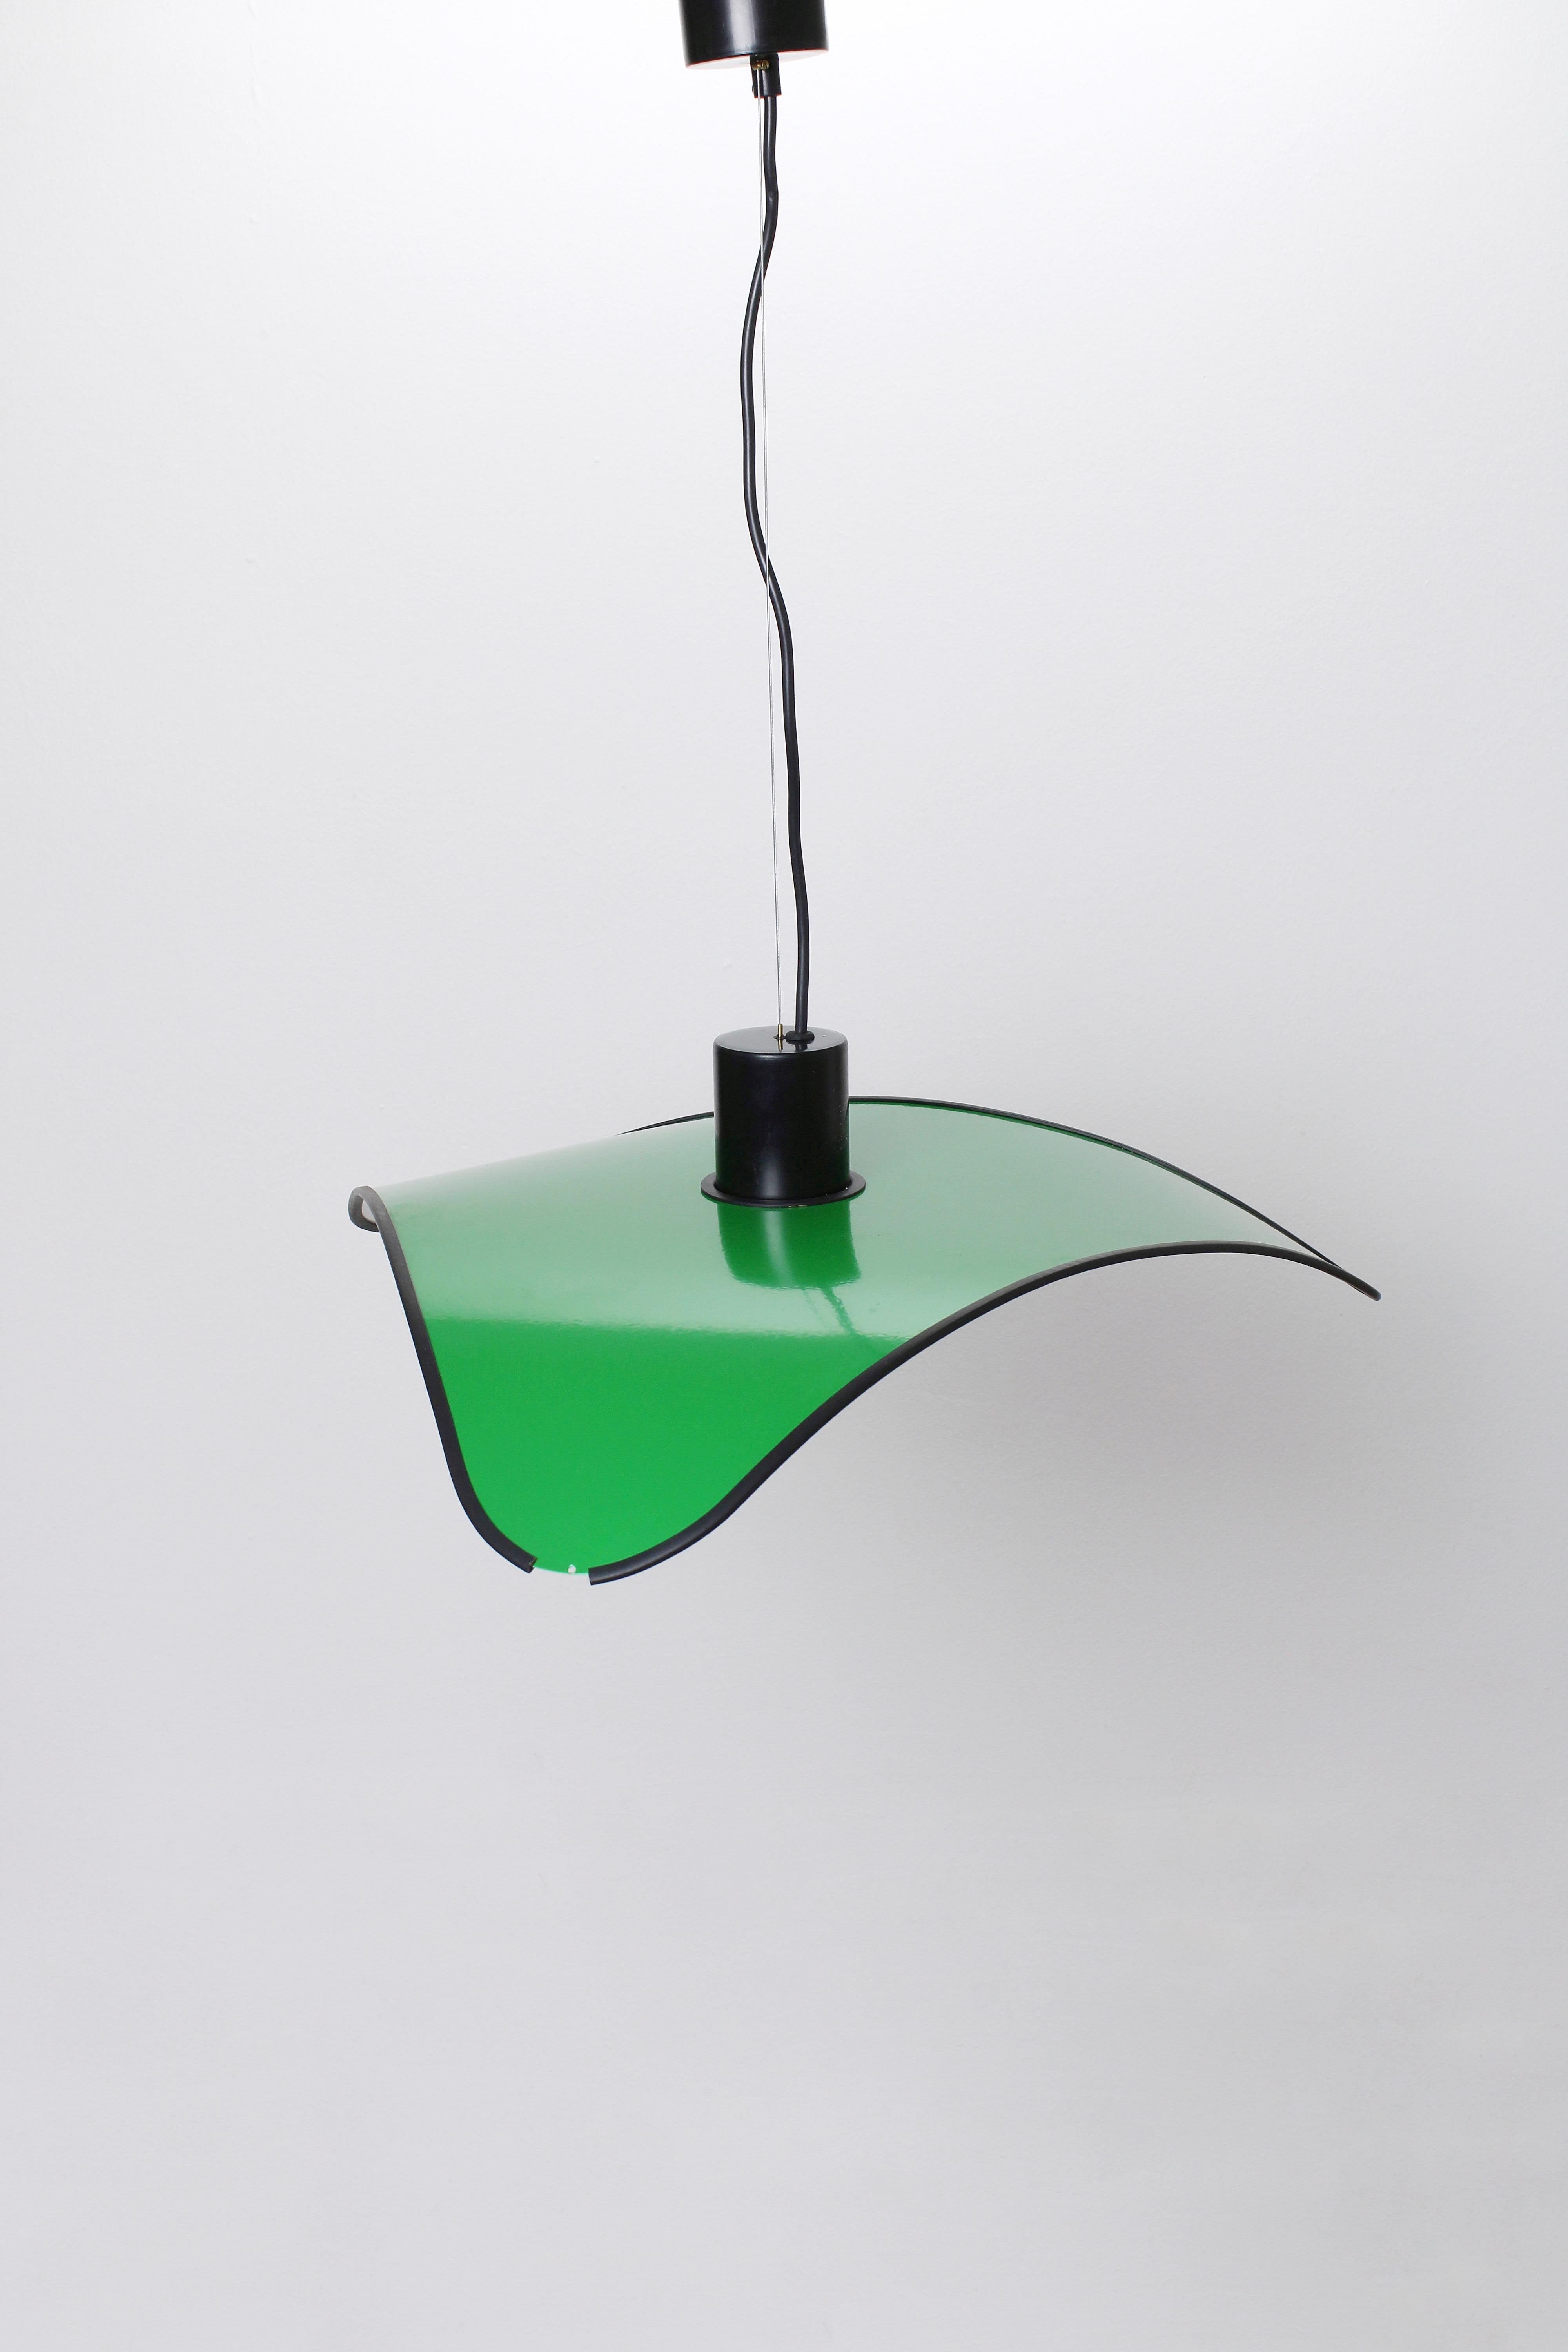 Late 20th Century Triangular Green Metal Pendant Lamp by IBIS, 1980s For Sale